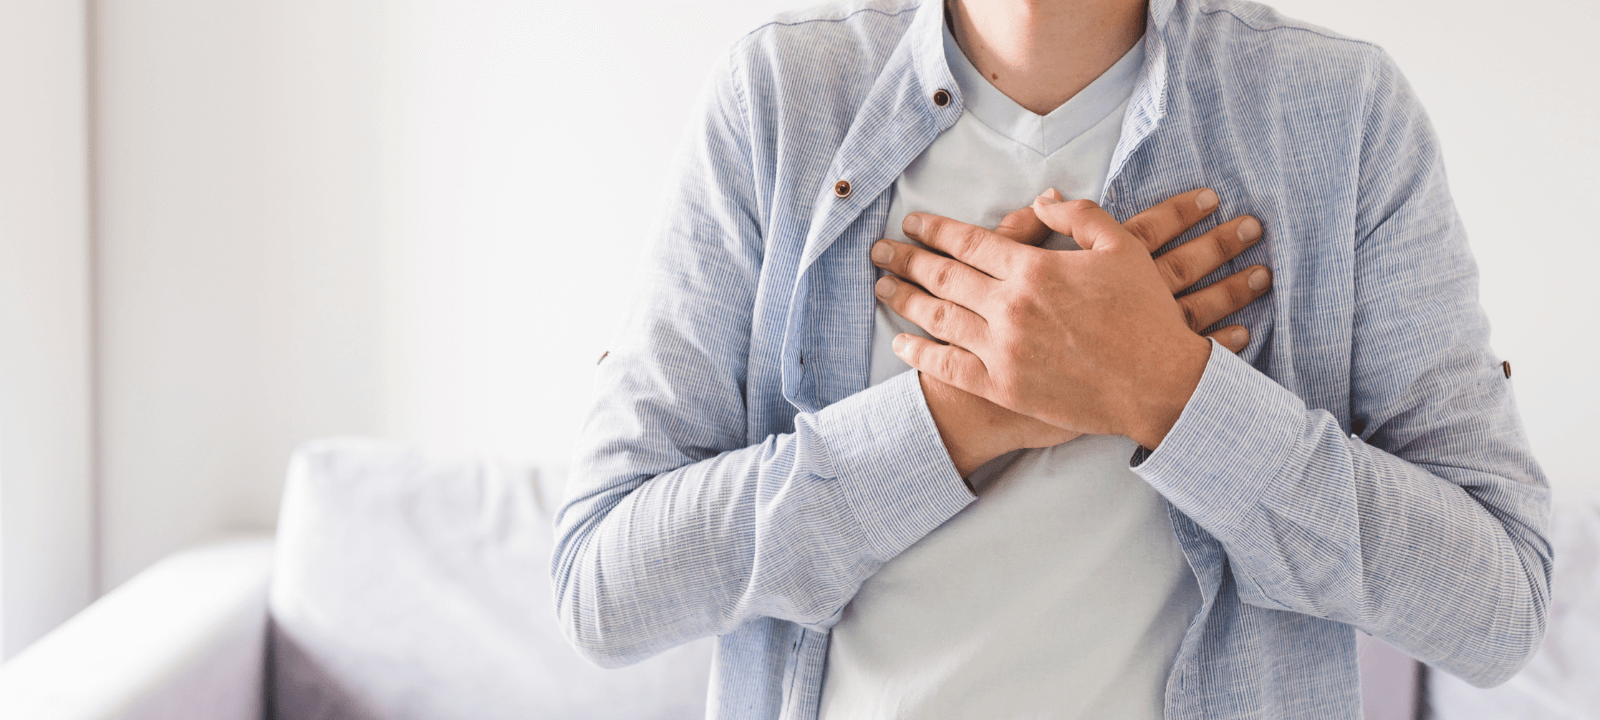 Anxiety Chest Pain Is Not a Heart Attack!